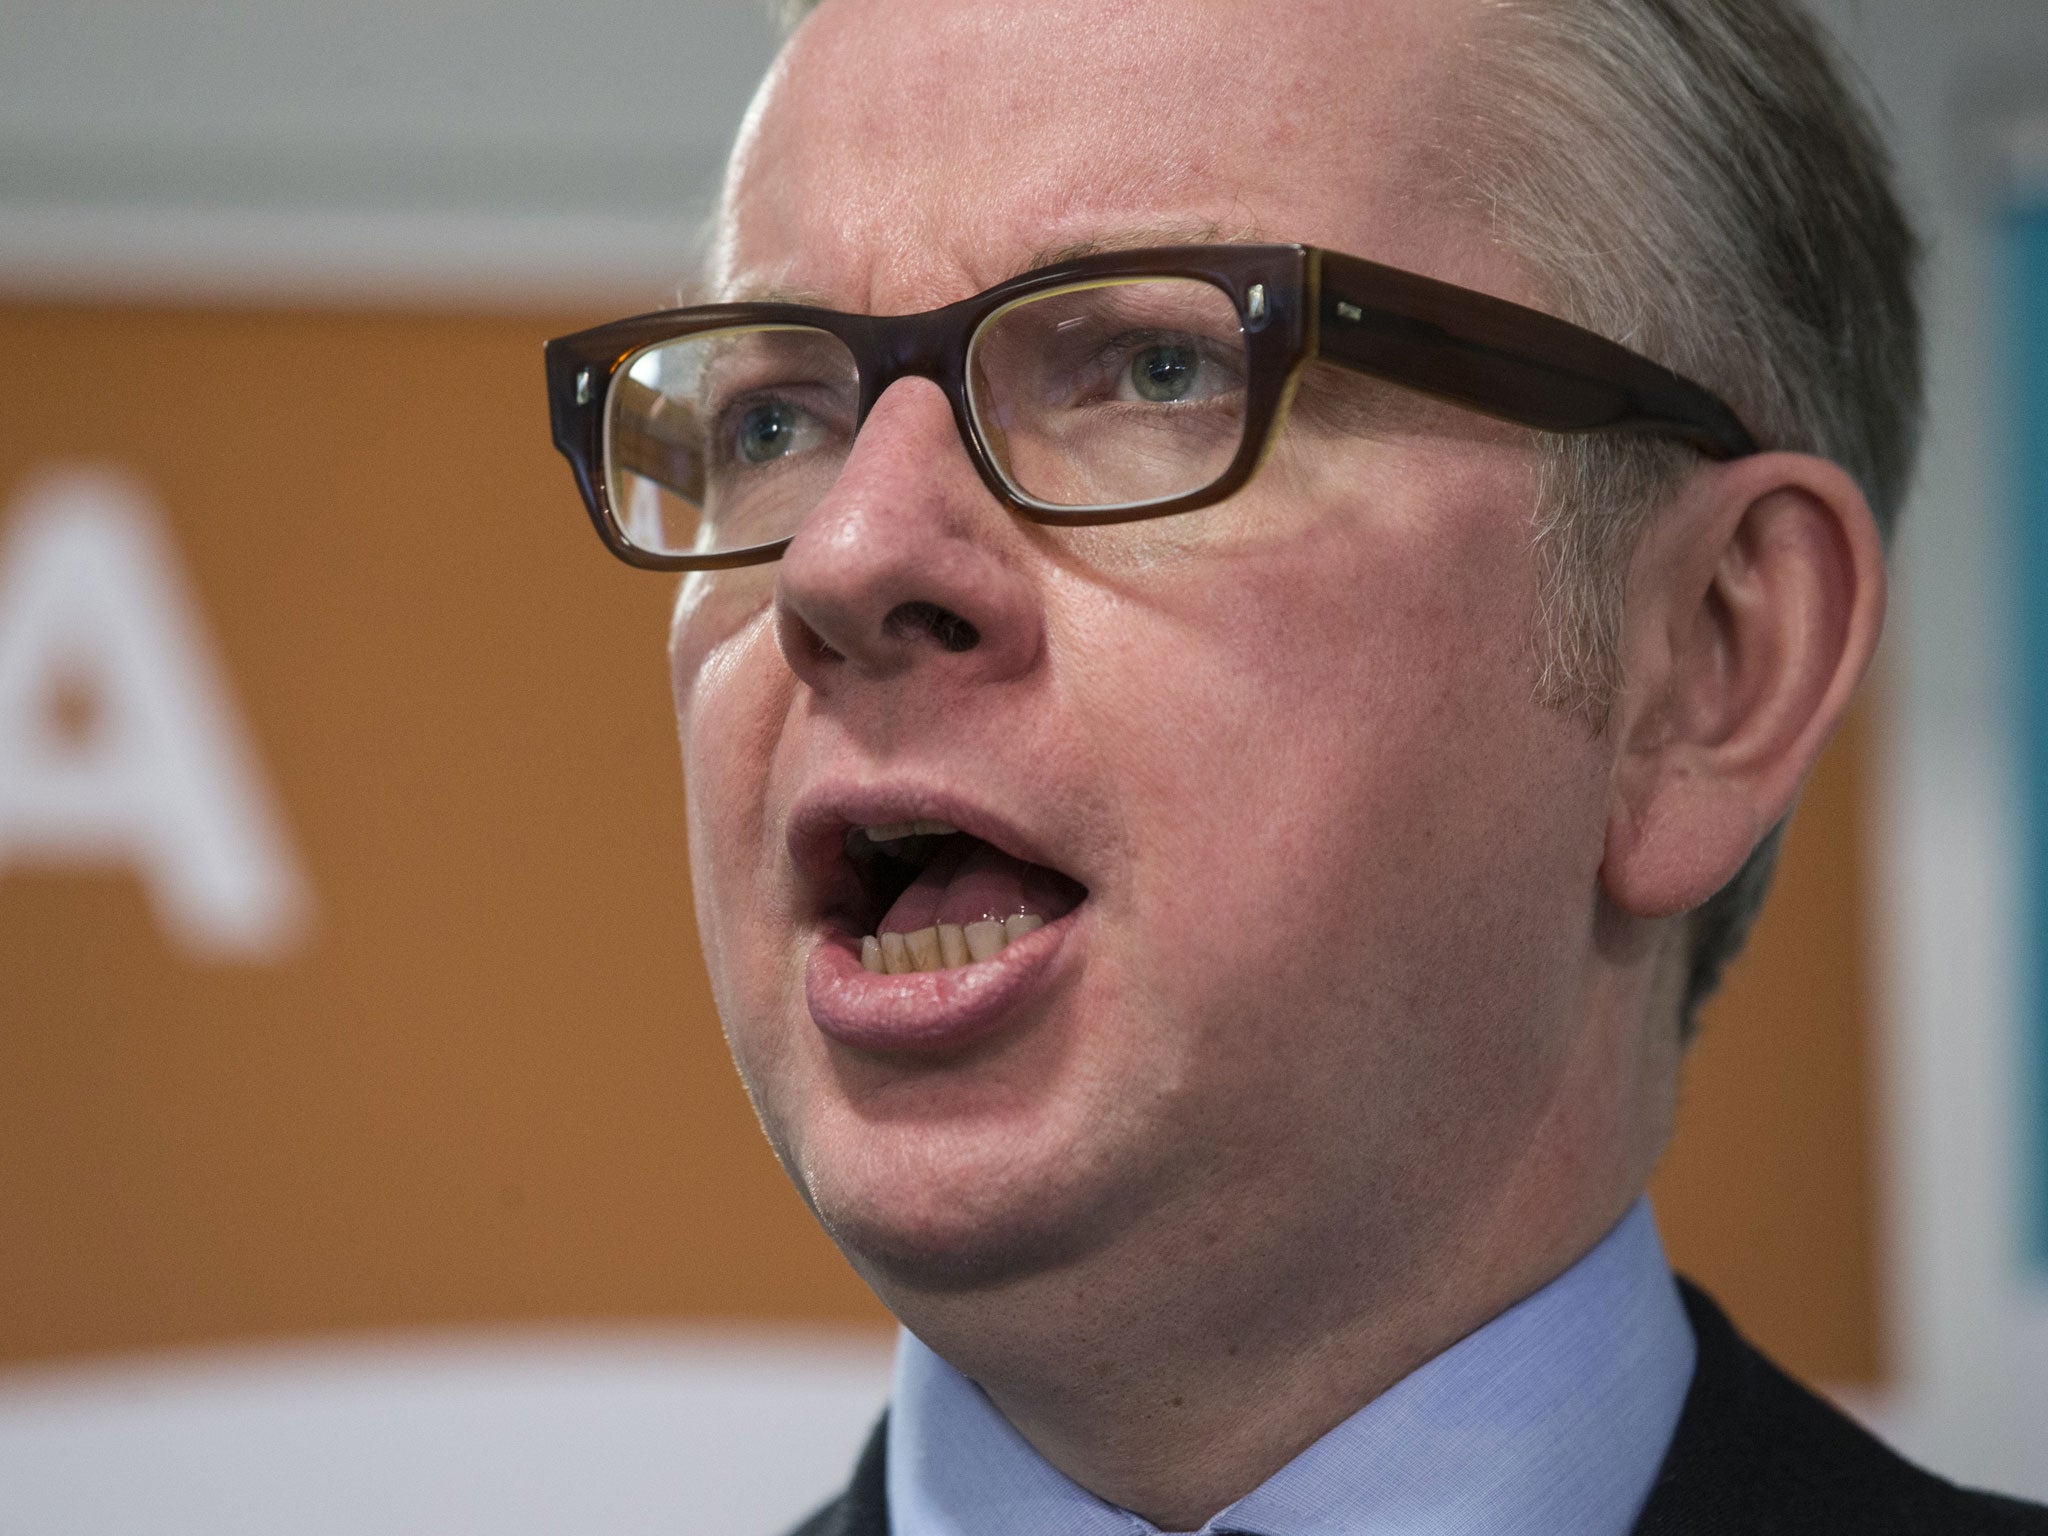 A satirical article headlined “Michael Gove decides to teach all children himself” was left on the Department for Education (DfE) website for a month